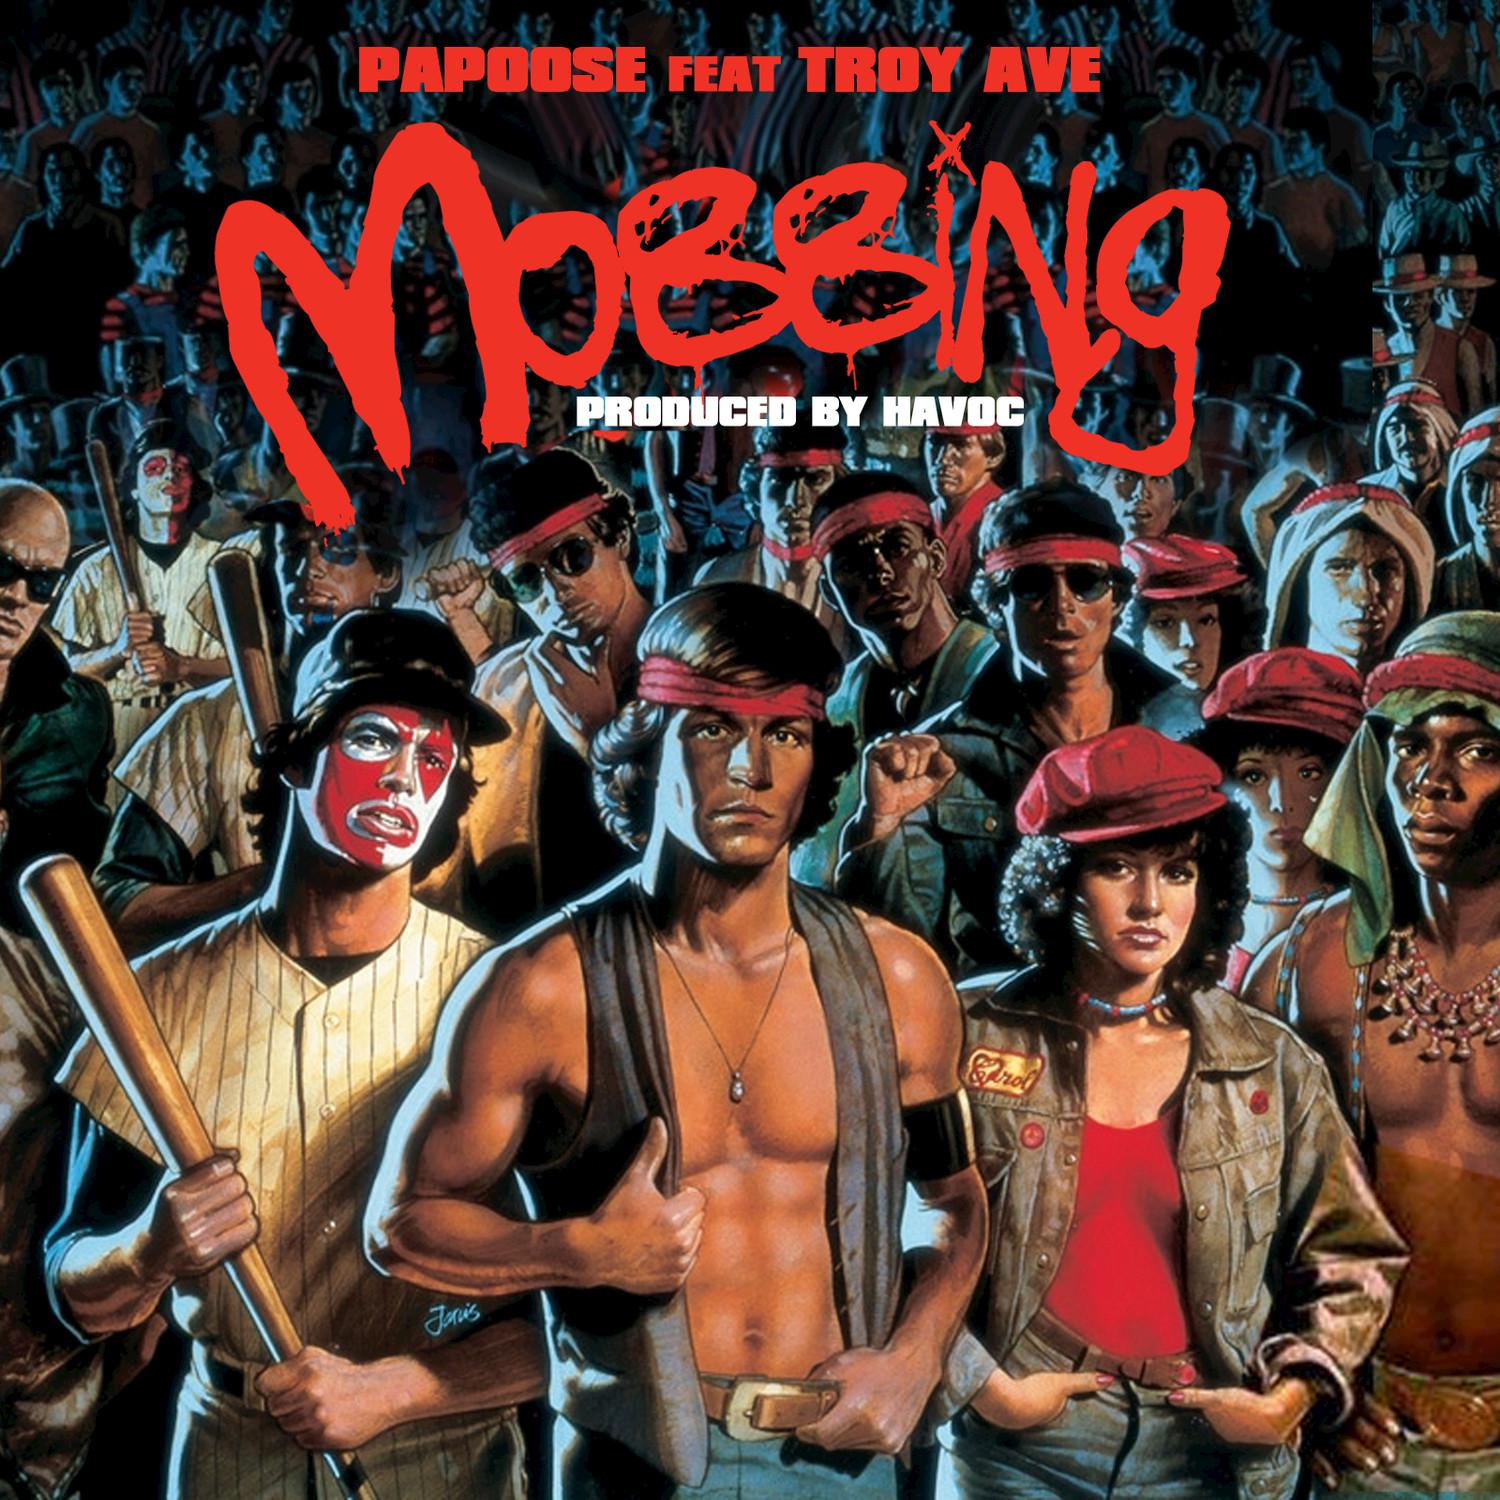 Mobbing (feat. Troy Ave)